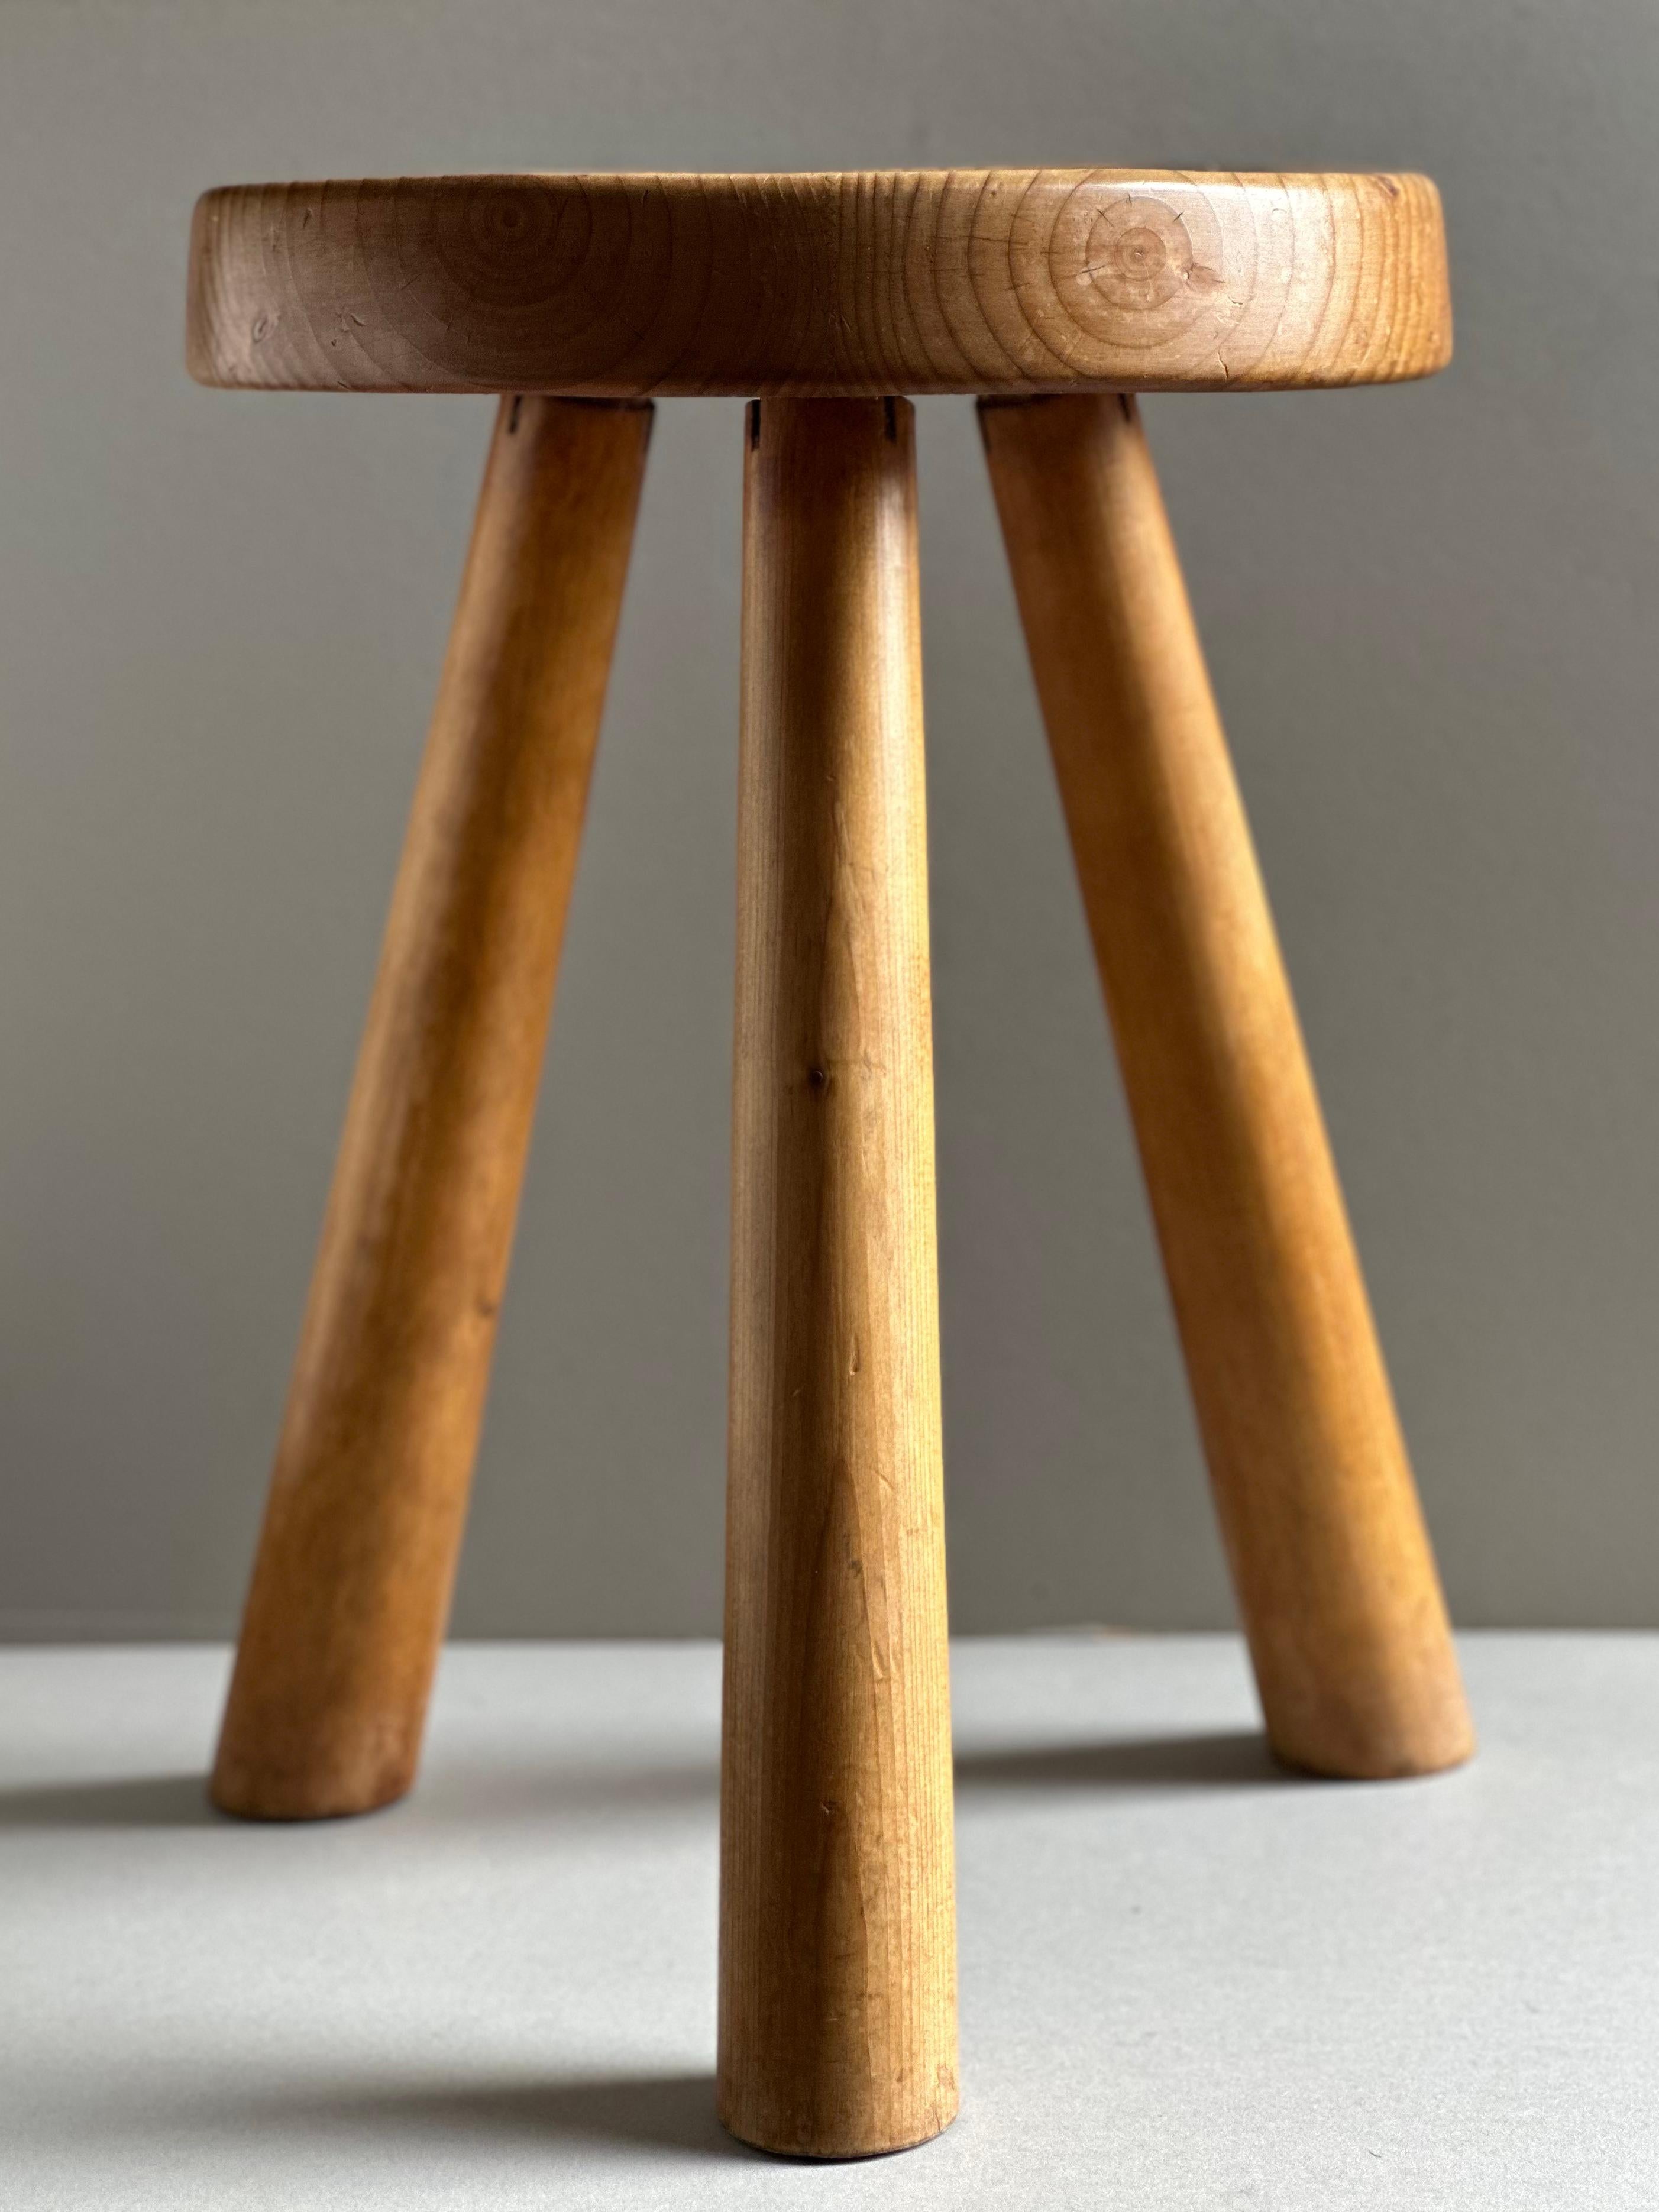 Tripod stool in pine designed by Charlotte Perriand for Les Arcs Ski Resort in Savoie, France, comprising a concave seat supported by tapering dowel legs. All original condition with an even, untouched patina.